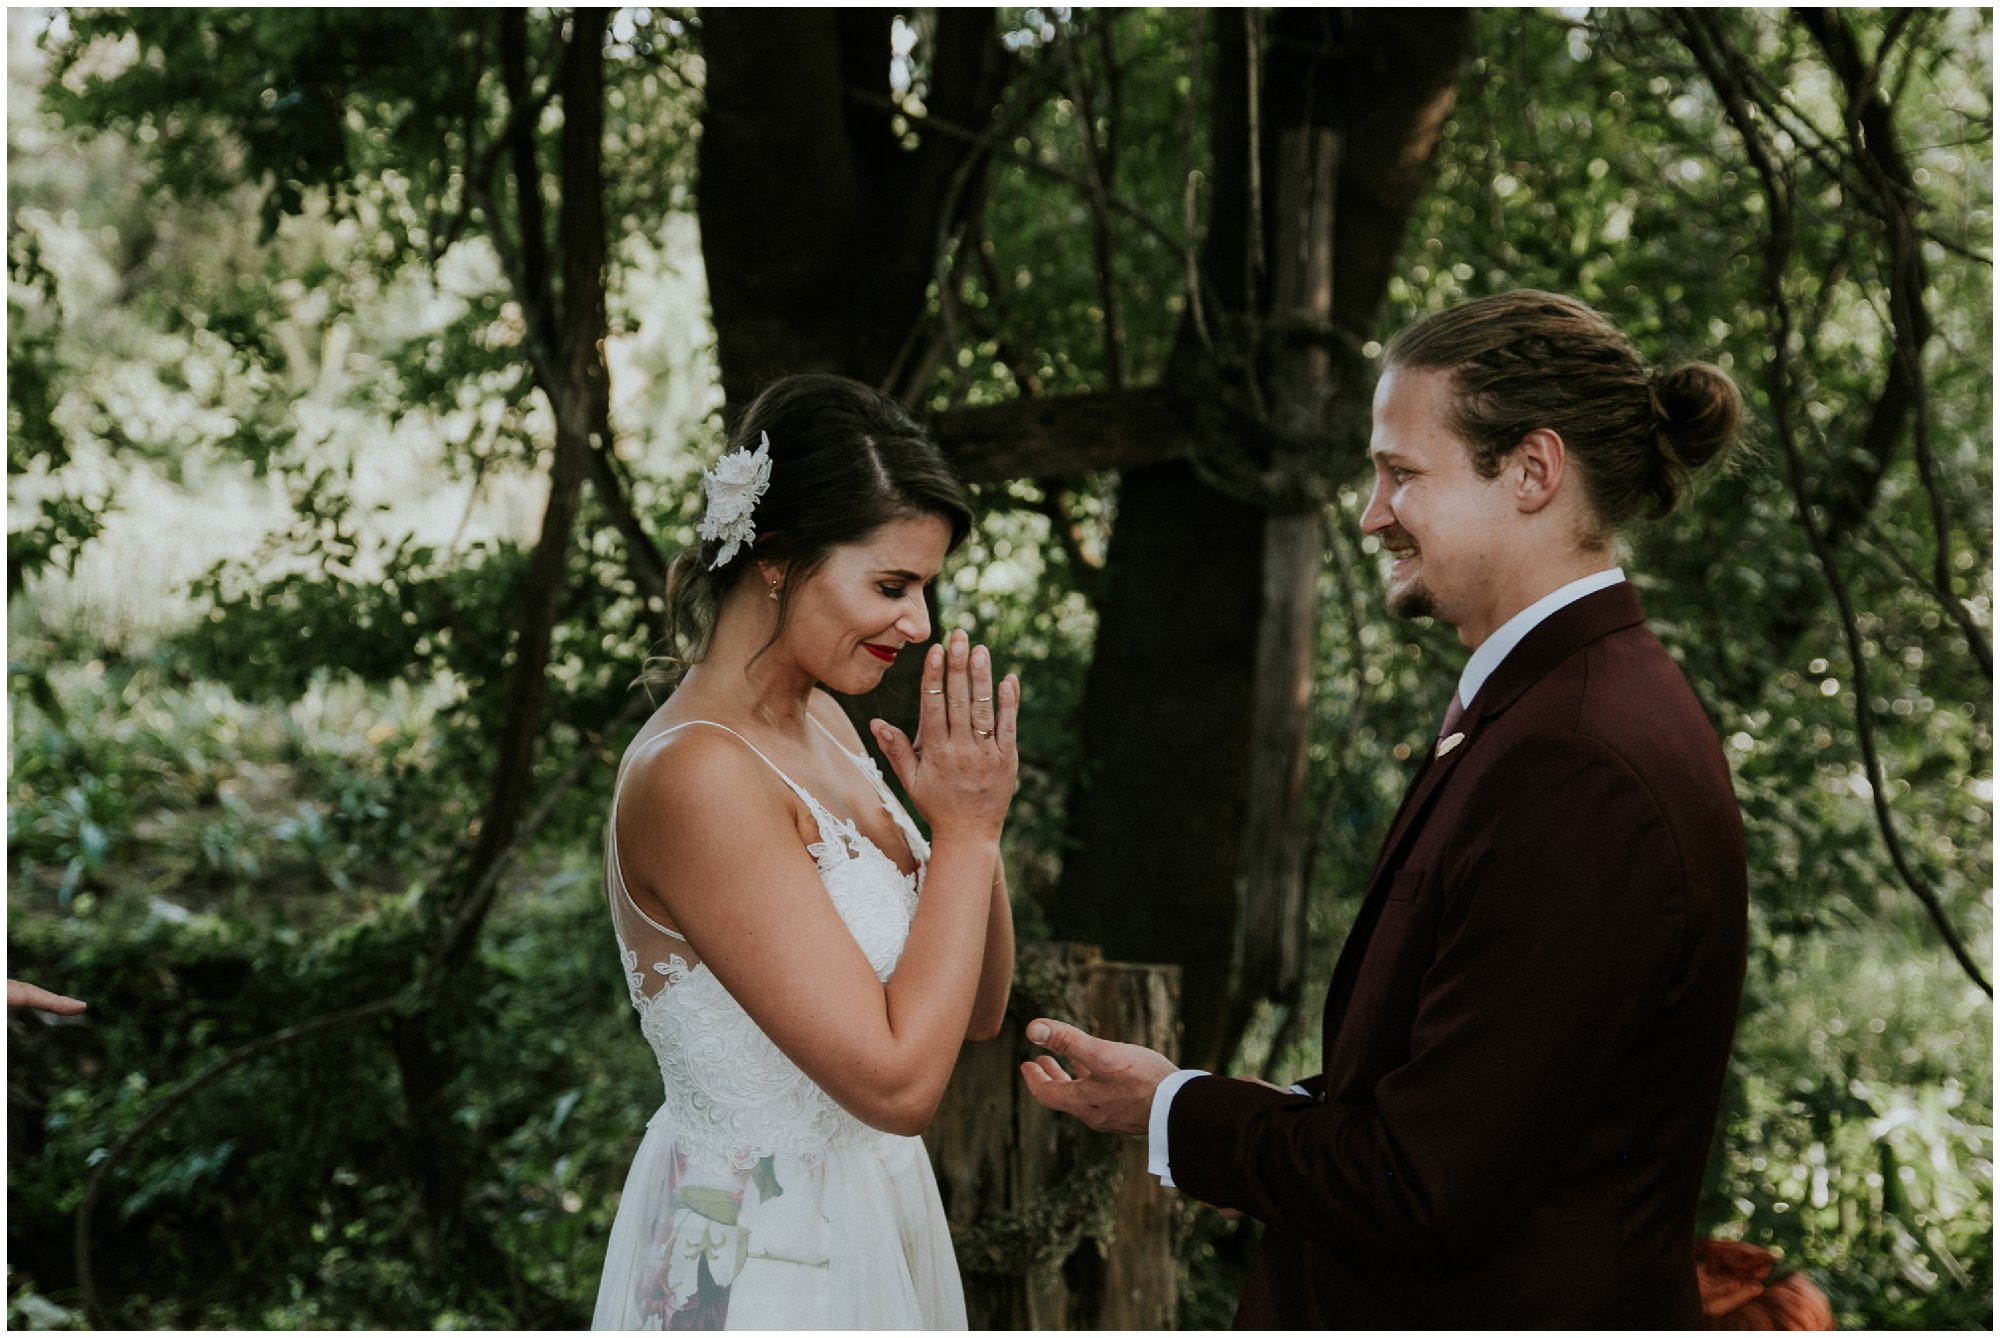 Ceremony at an Outdoor Bohemian Destination Wedding at Francine’s Venue in Hoedspruit Limpopo by Junebug World's Best Photographer Maryke Albertyn Award Winning International Alternative Moody Photography based in Cape Town South Africa